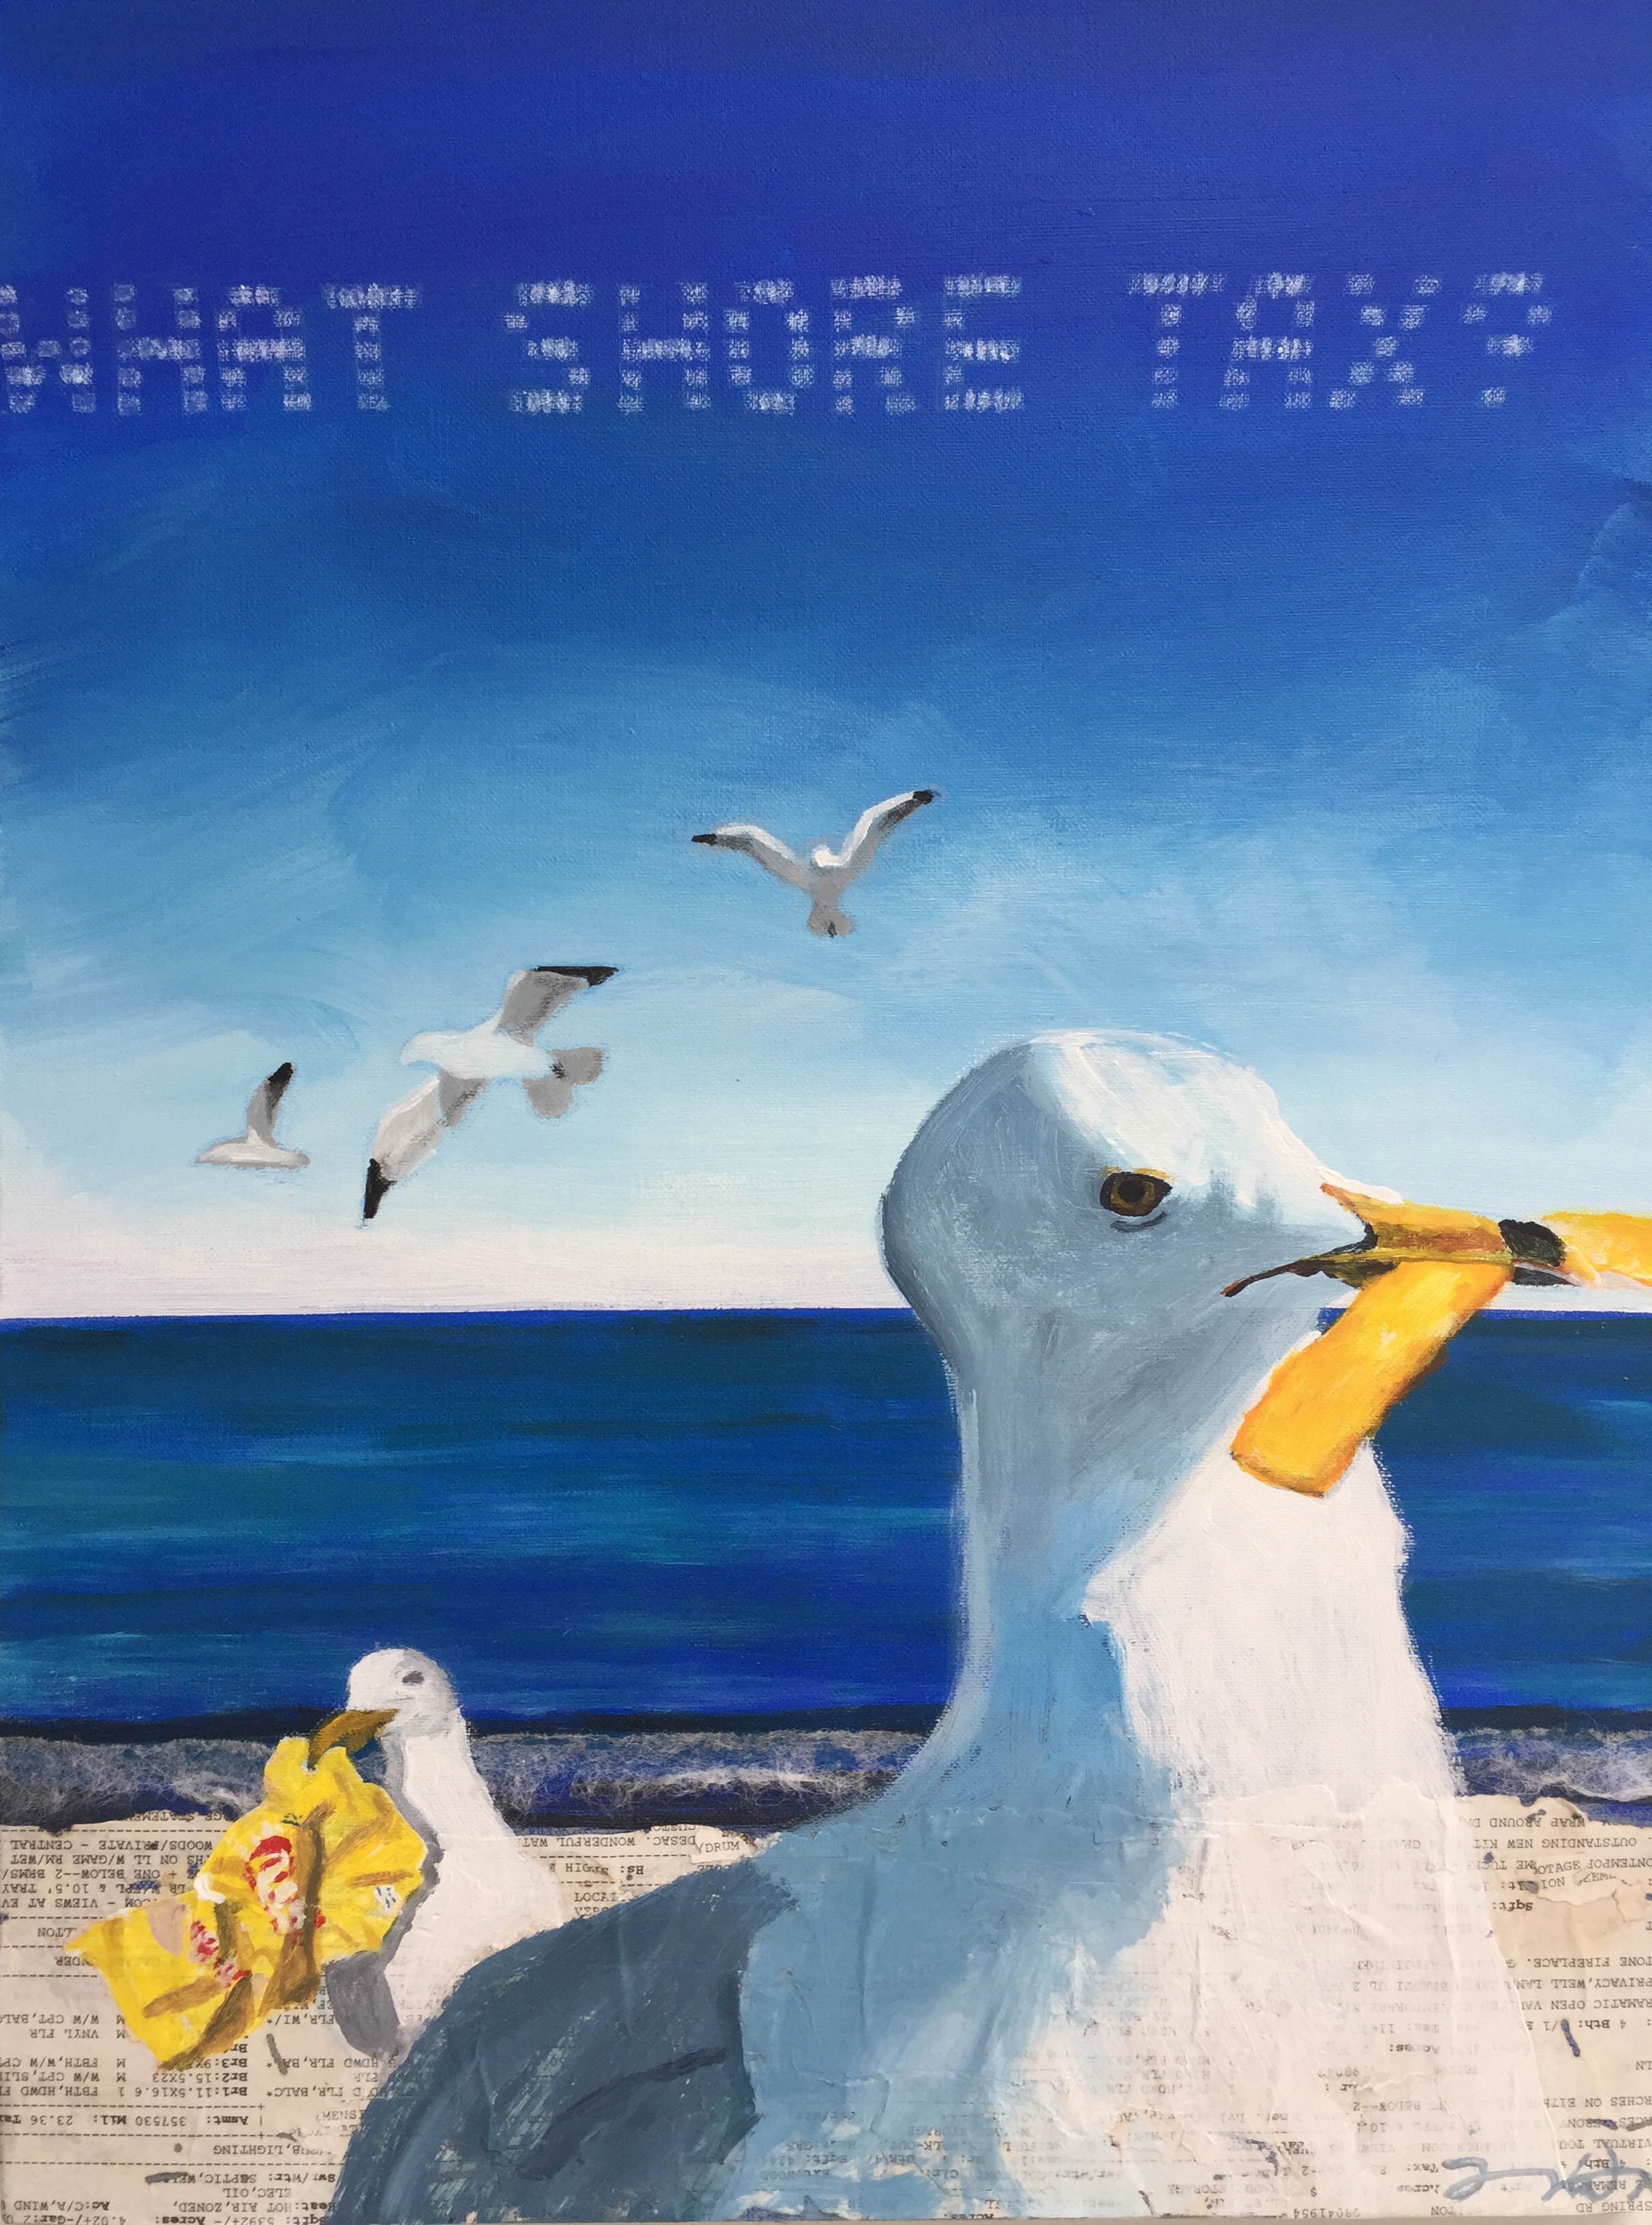 WHAT SHORE TAX?